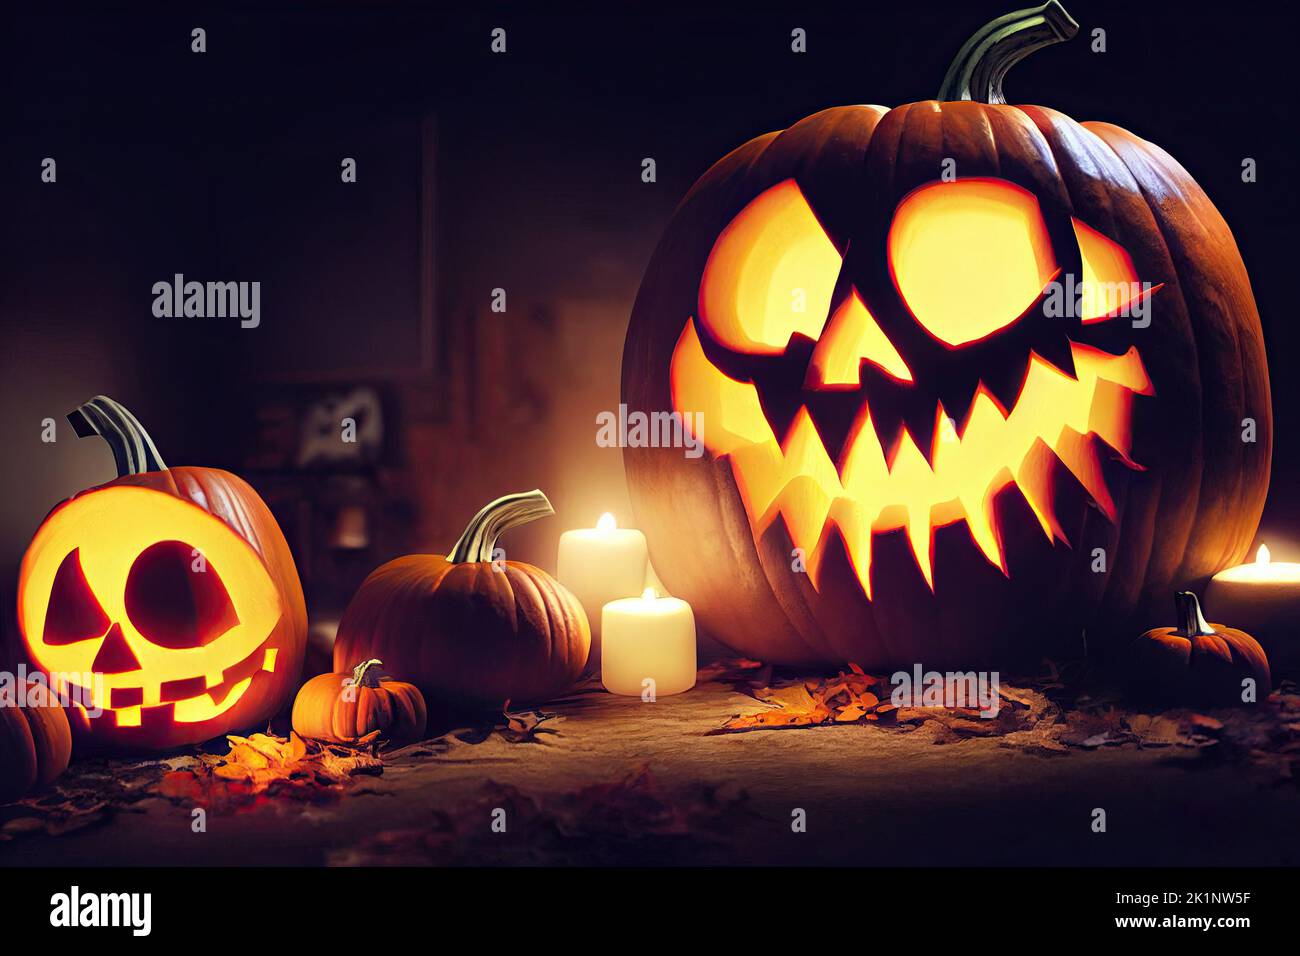 Candles flickering and pumpkins sitting on a table in the dark at night during Halloween. 3D illustration and fantasy digital painting. Stock Photo